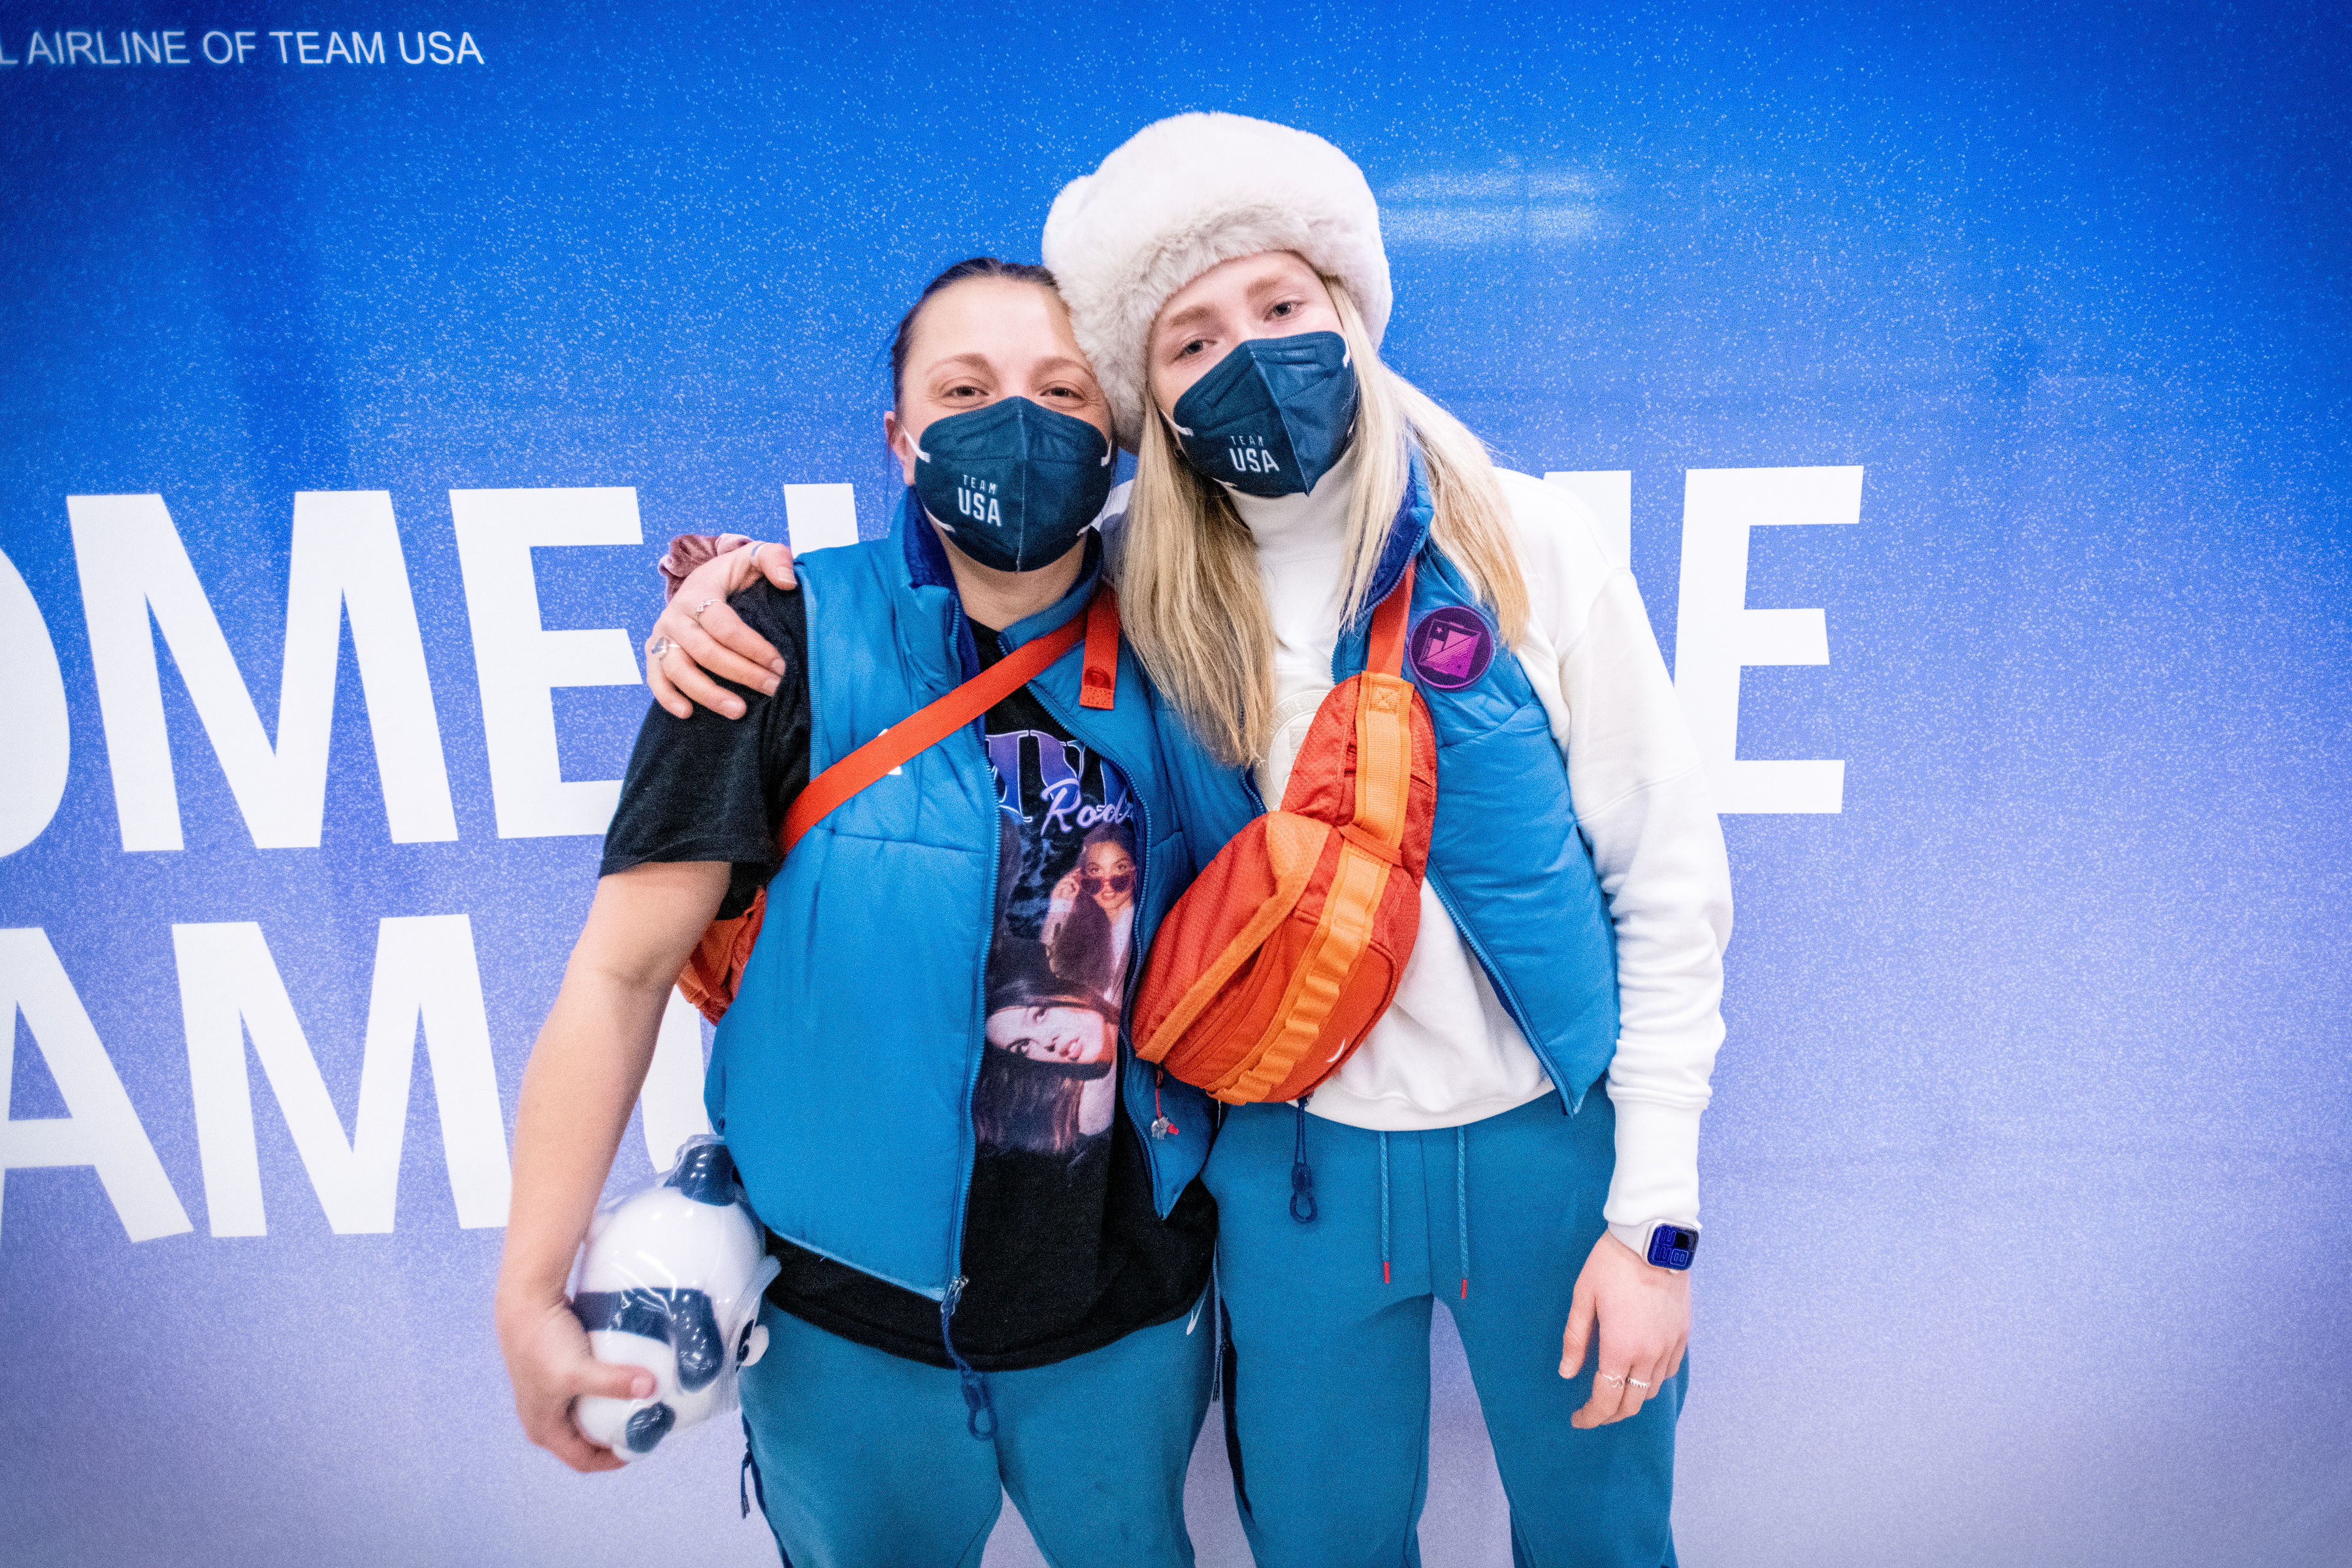 Freestyle skiiers Darian Stevens and Maggie Voisin pose for a portrait as Team USA athletes arrive at Salt Lake City International Airport in Salt Lake City, Utah on Monday, February 21, 2022.